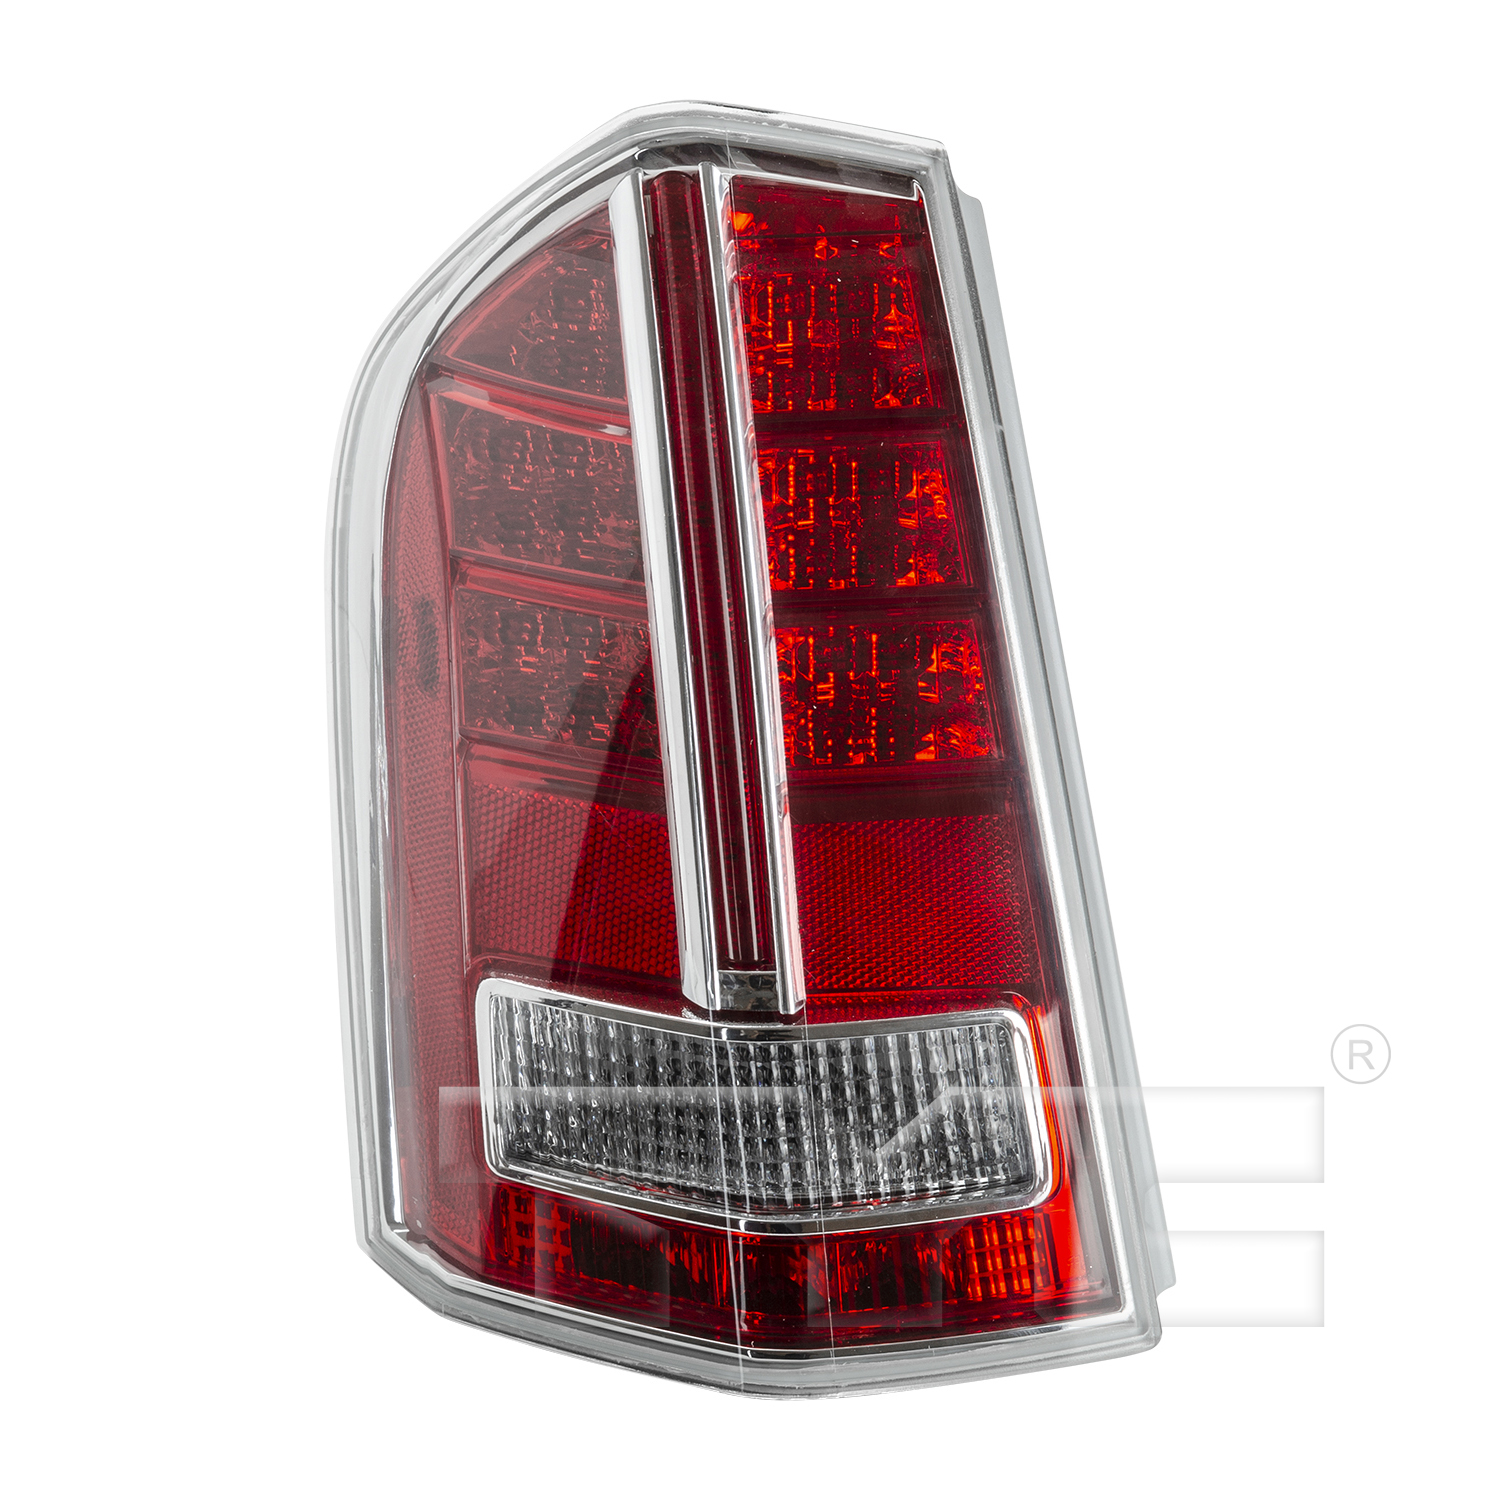 Aftermarket TAILLIGHTS for CHRYSLER - 300, 300,12-14,LT Taillamp lens/housing